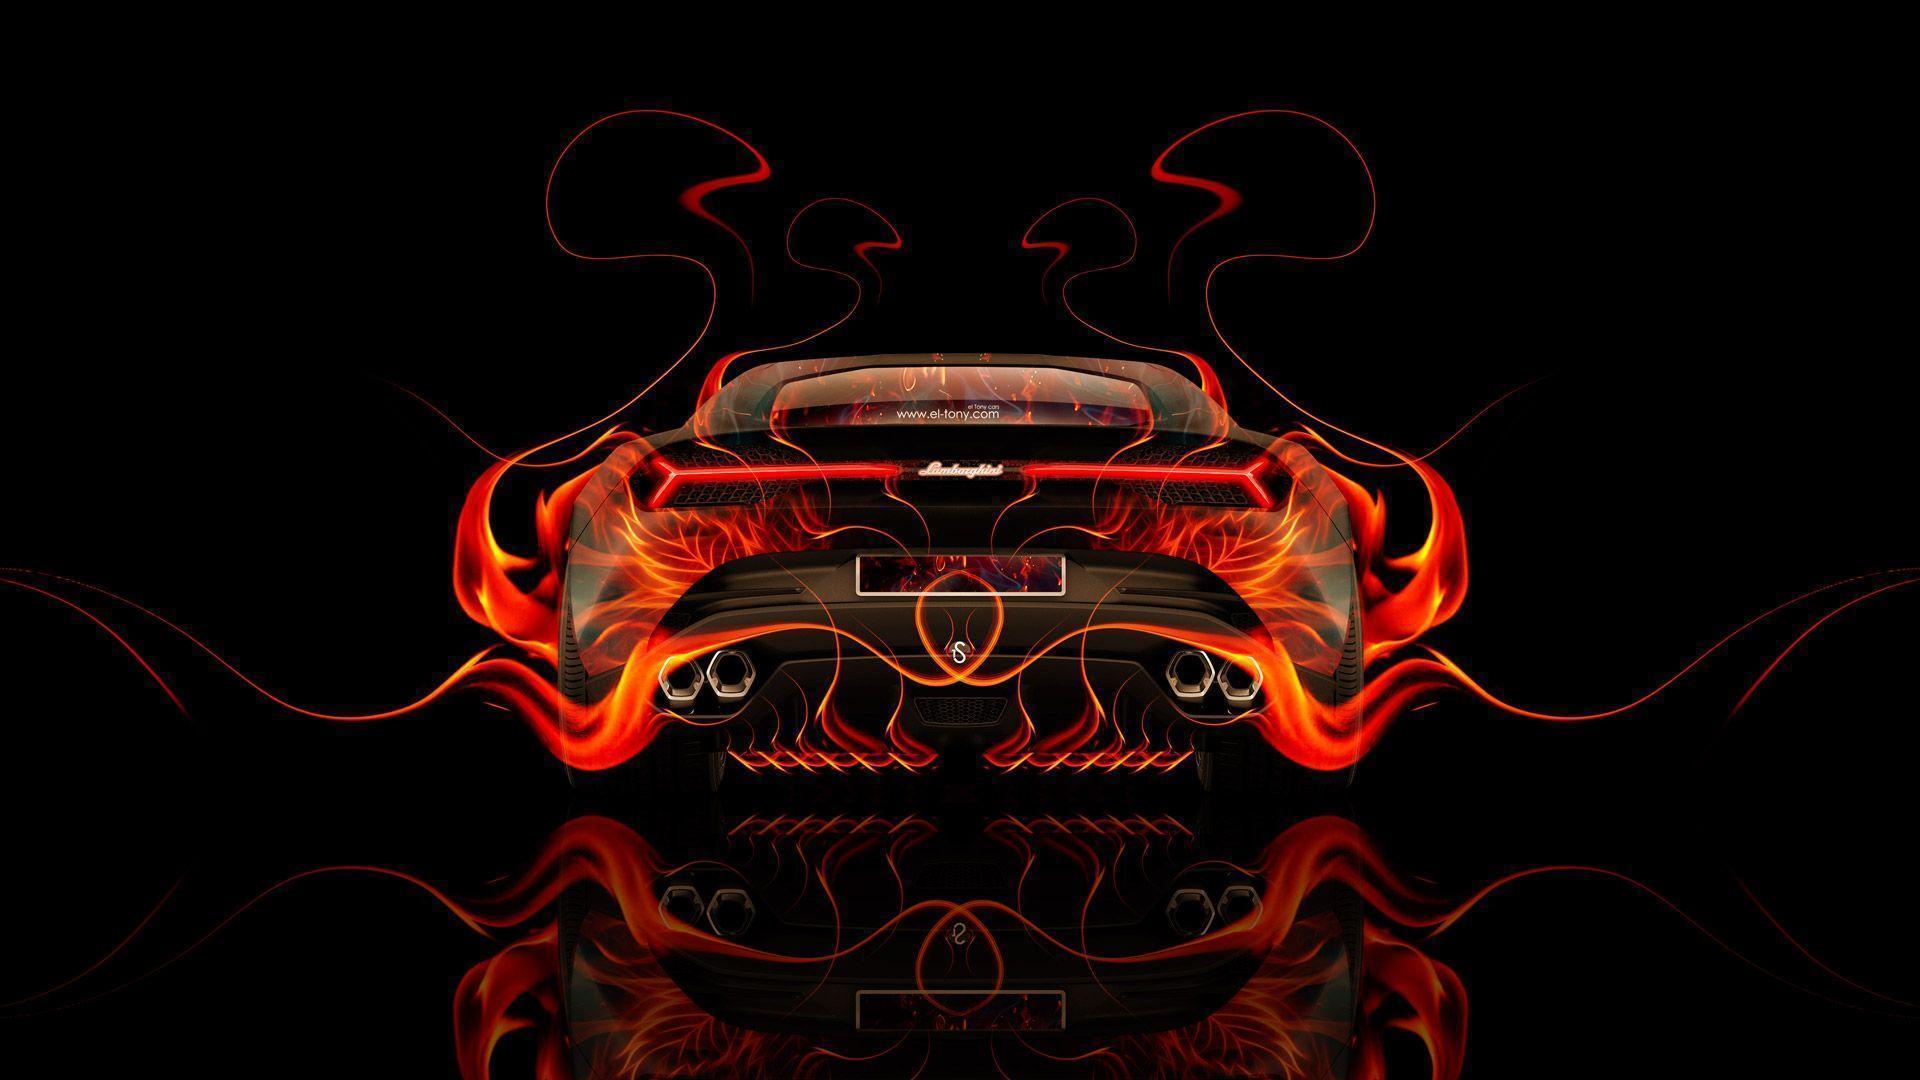 Lamborghini Asterion Back Fire Abstract Car 2014